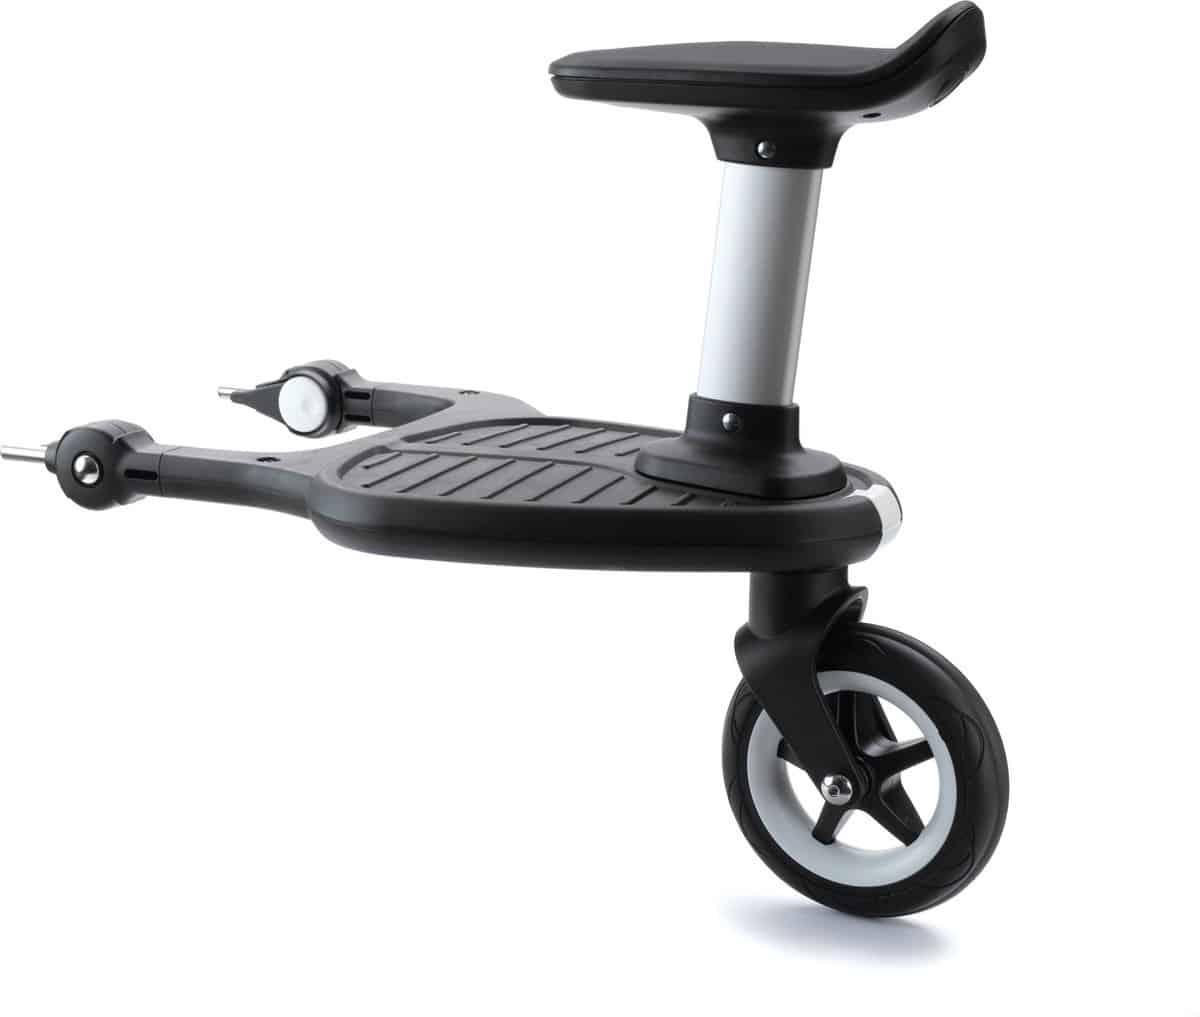 Most useful wheeled board for pushchair - Bugaboo